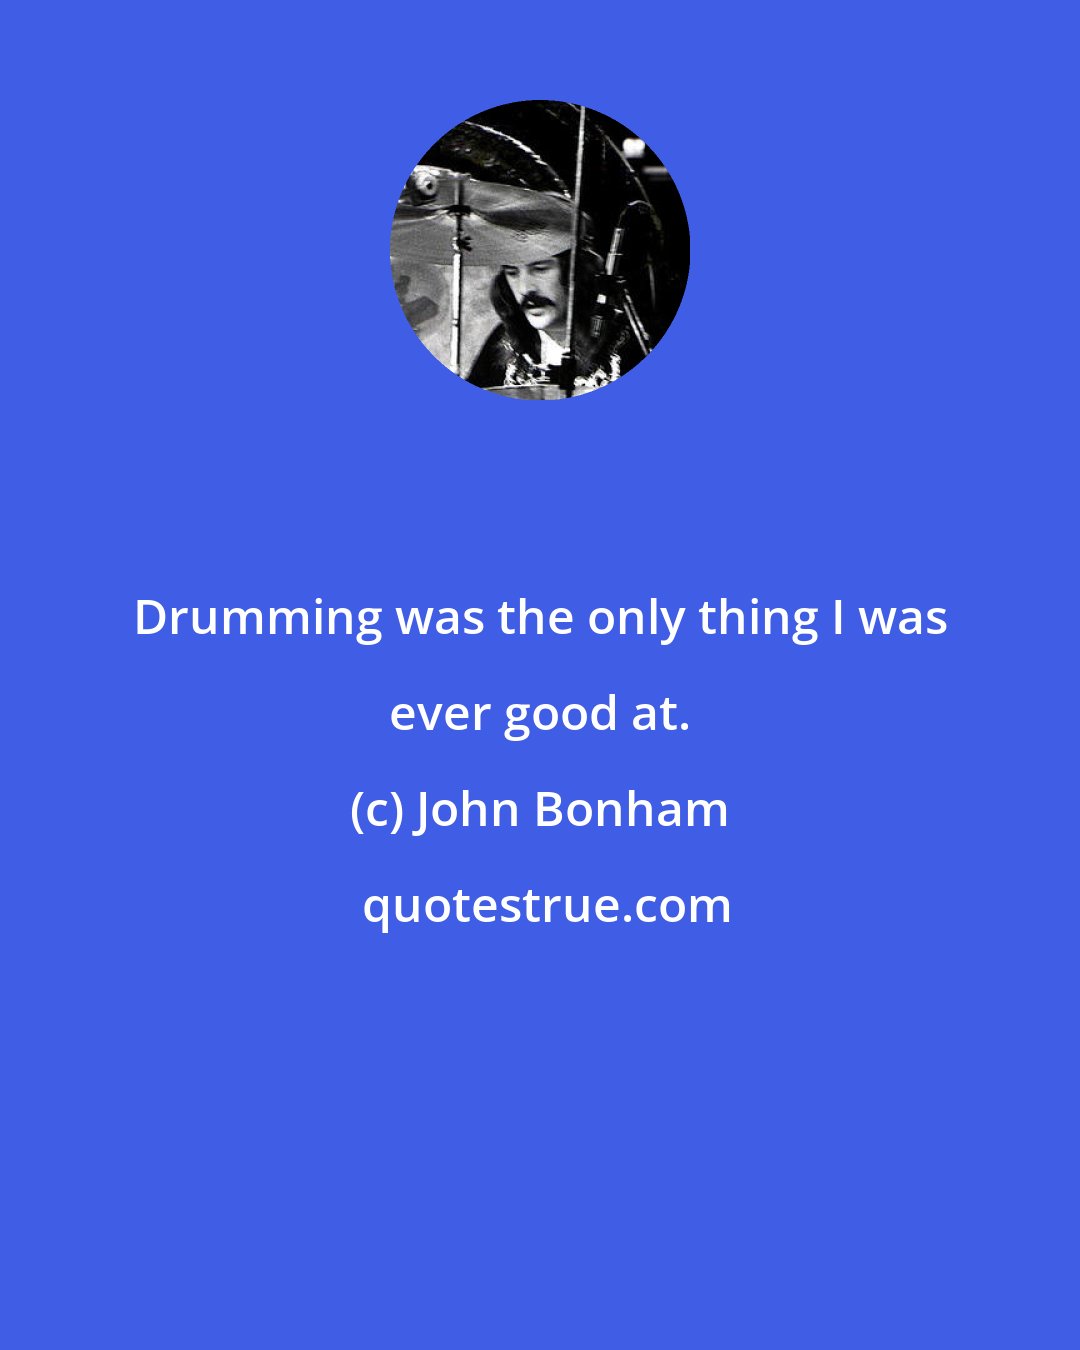 John Bonham: Drumming was the only thing I was ever good at.